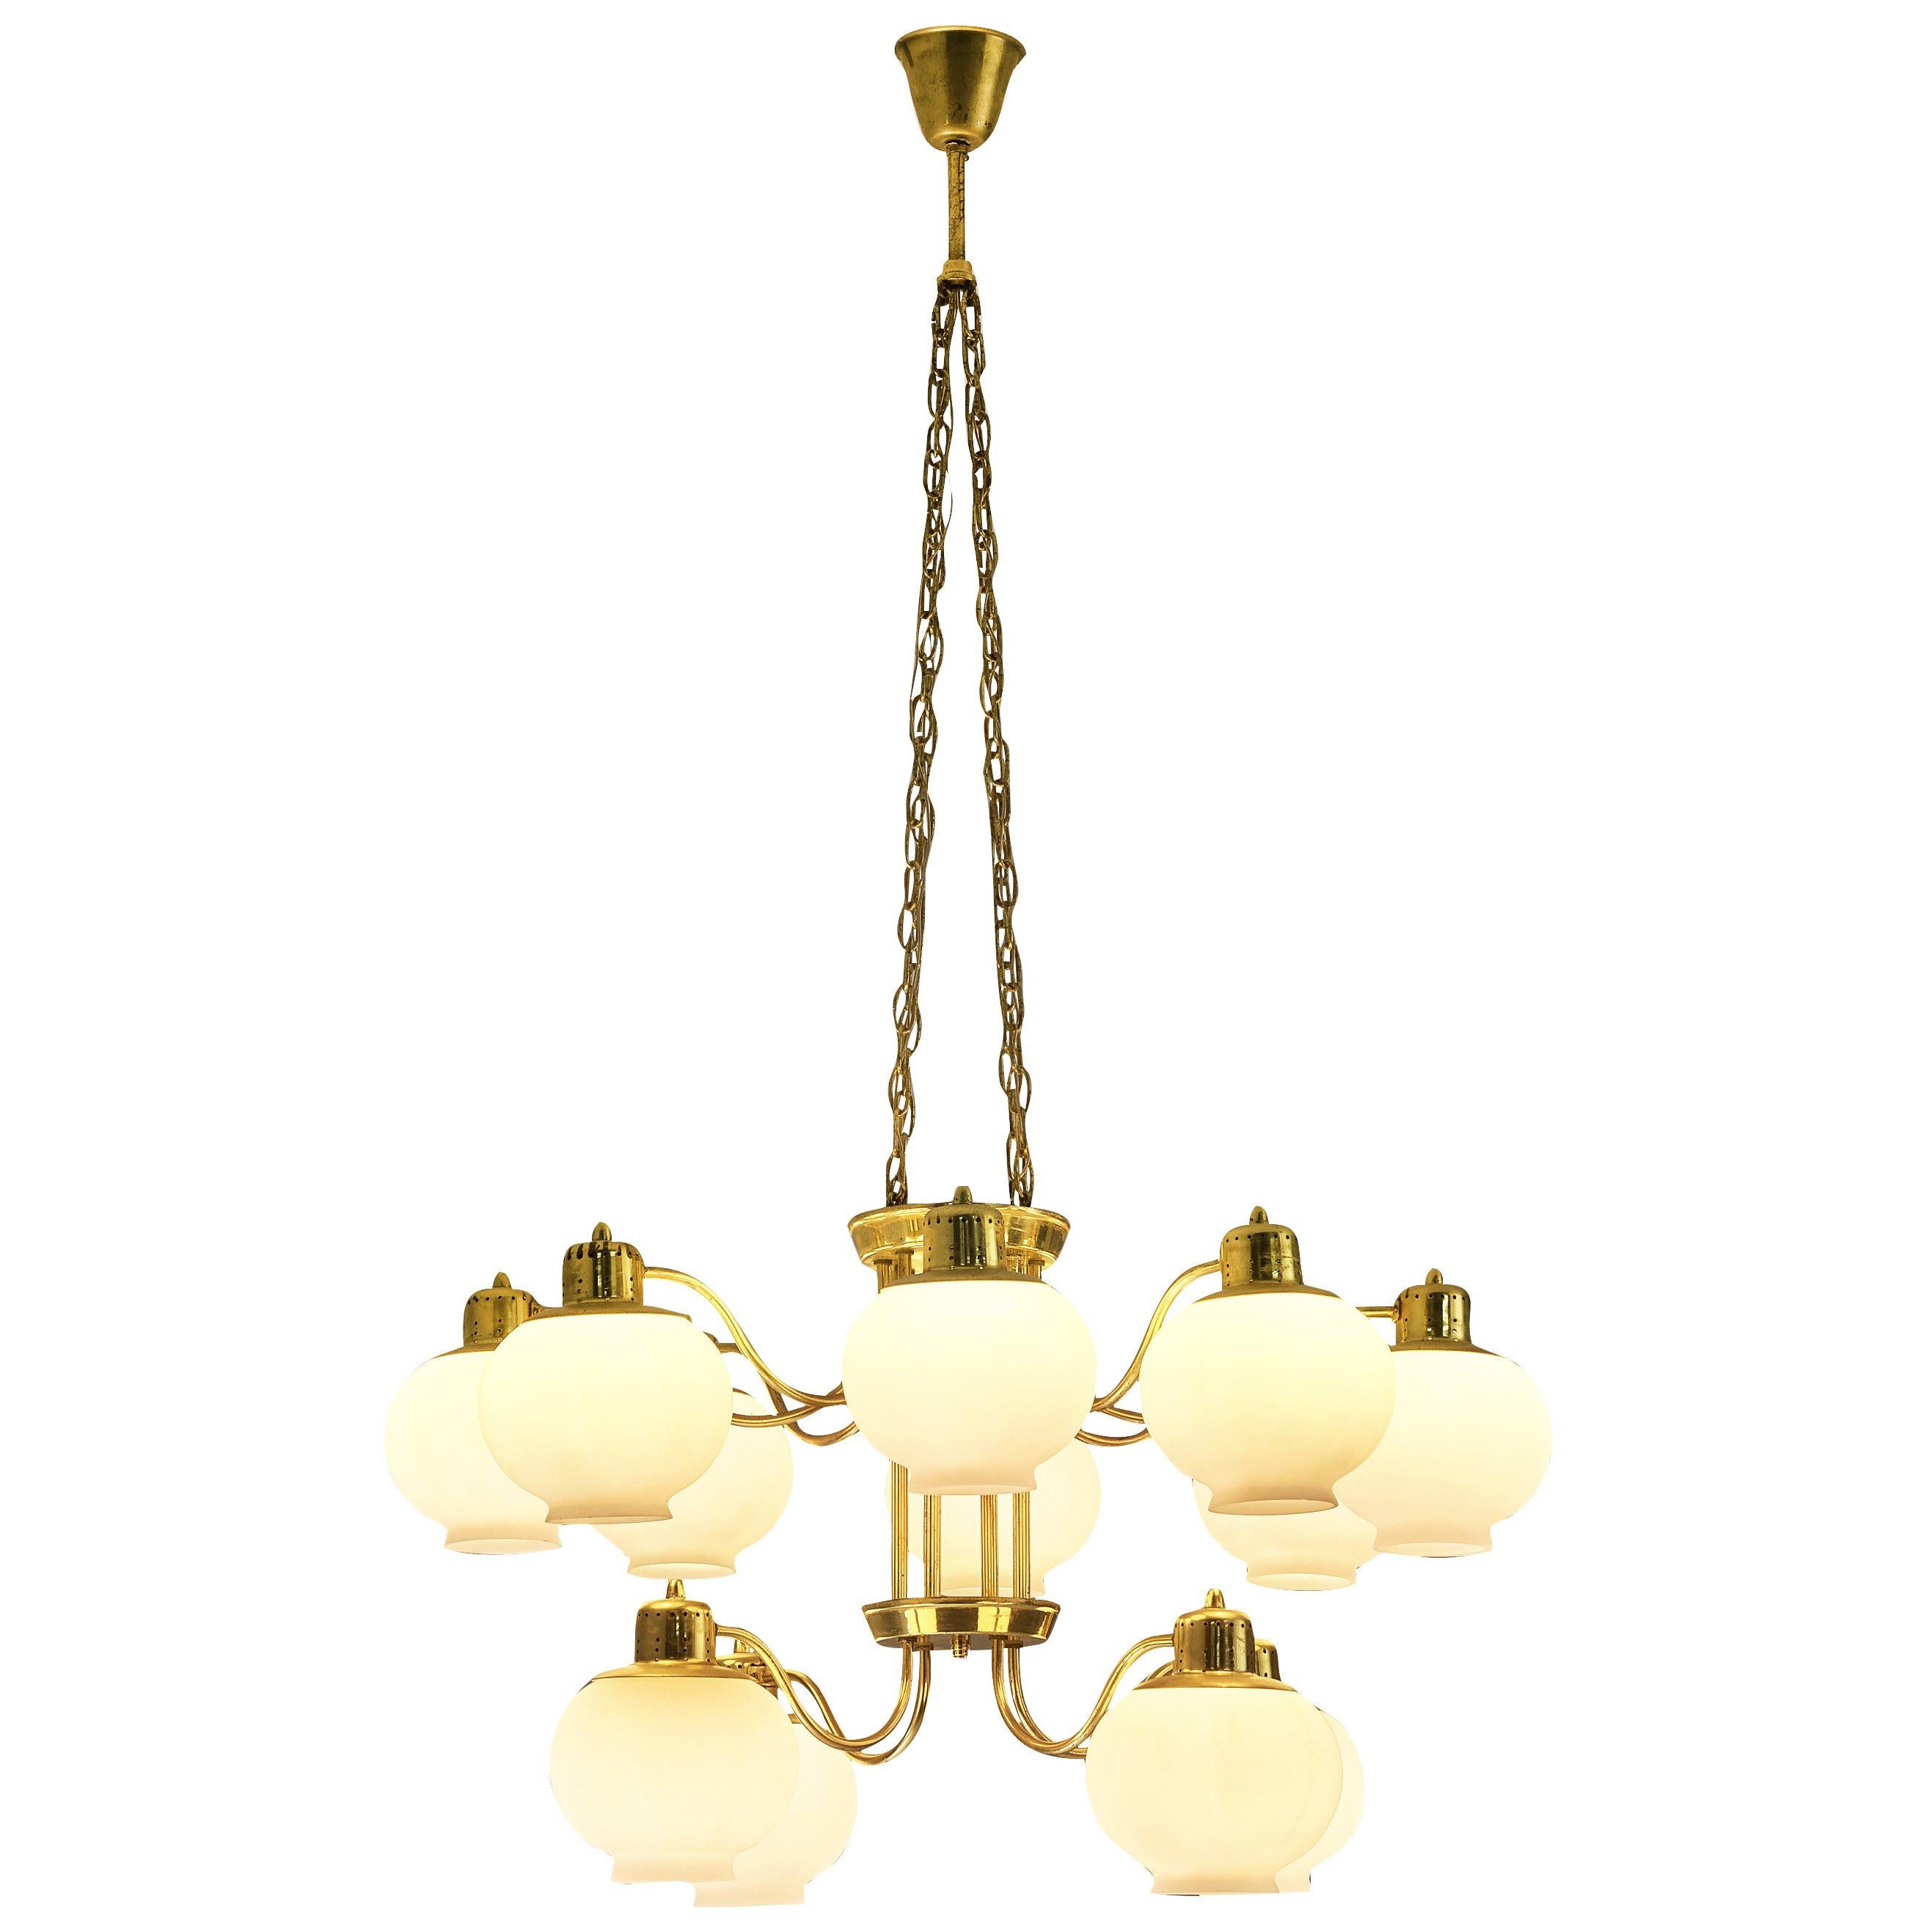 Hans-Agne Jakobsson Large Chandelier in Brass and Glass